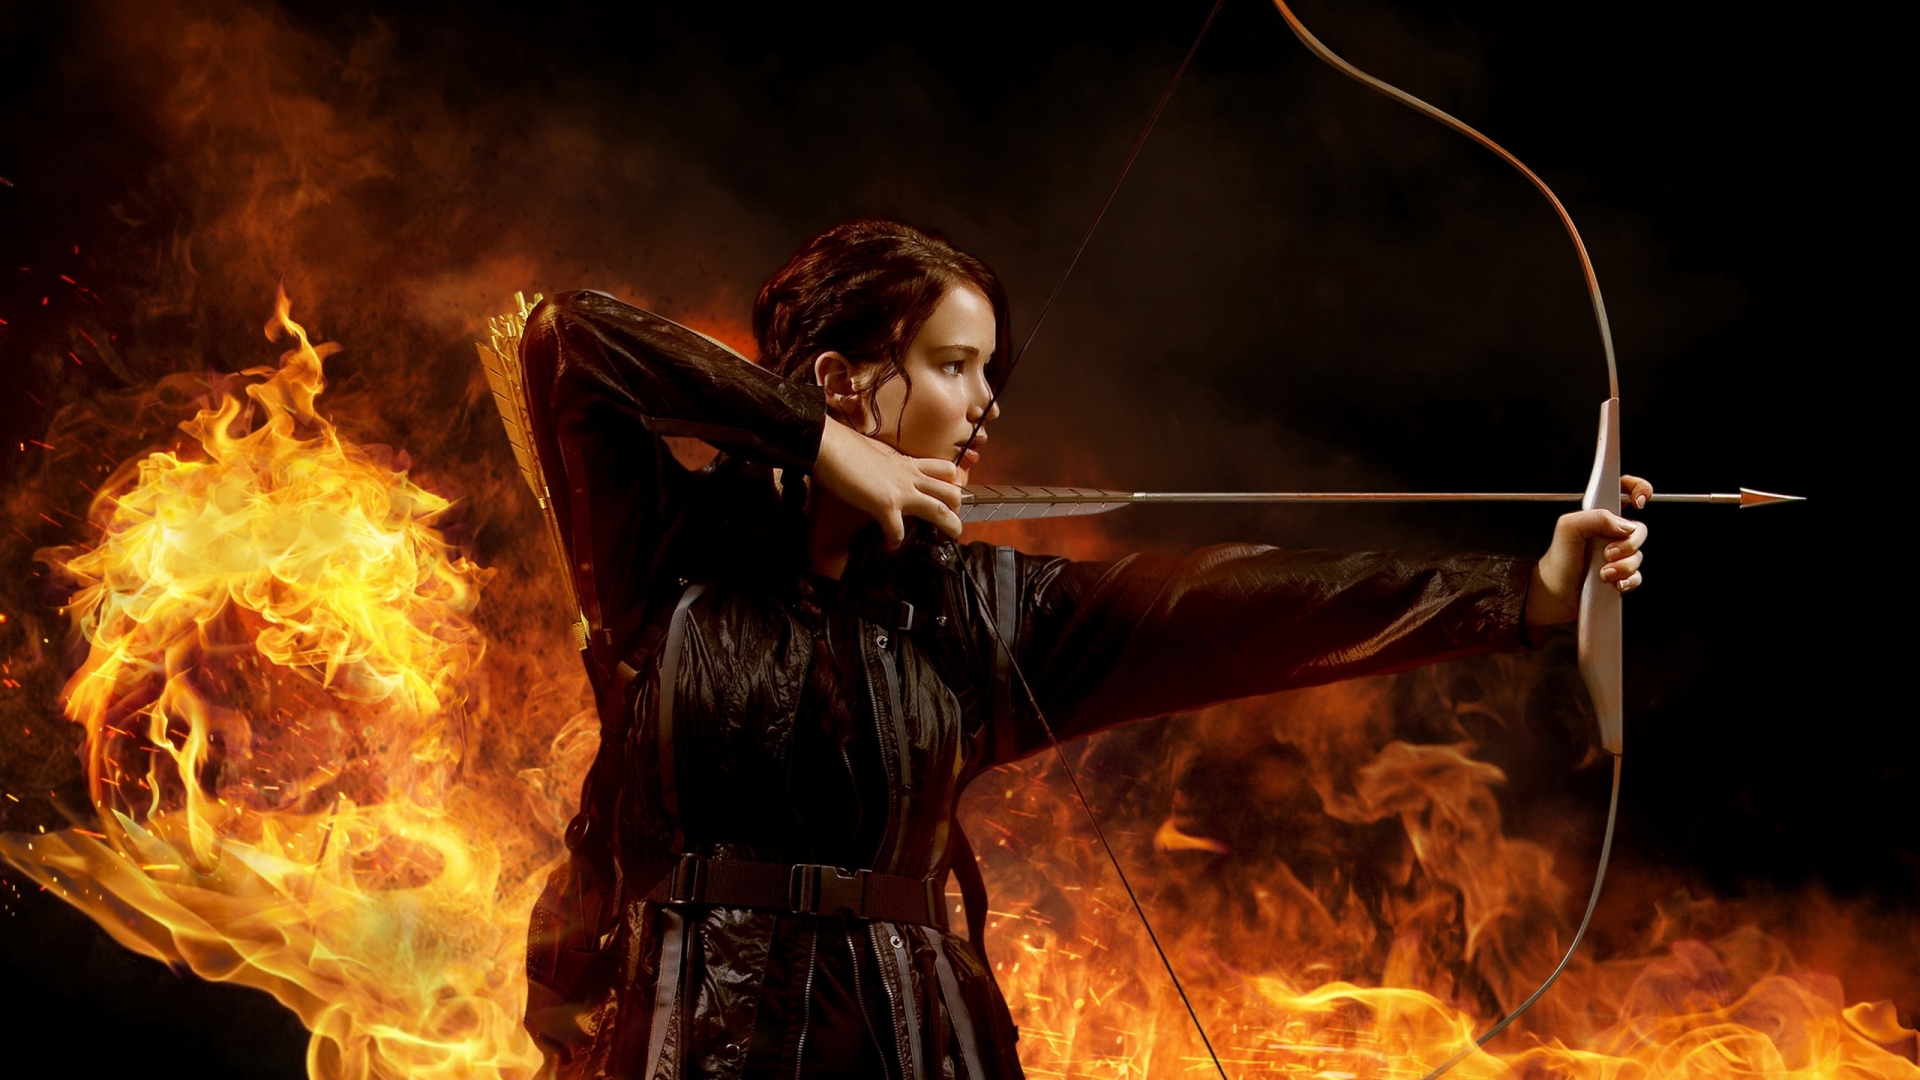 The Hunger Games 2013 for 1920 x 1080 HDTV 1080p resolution